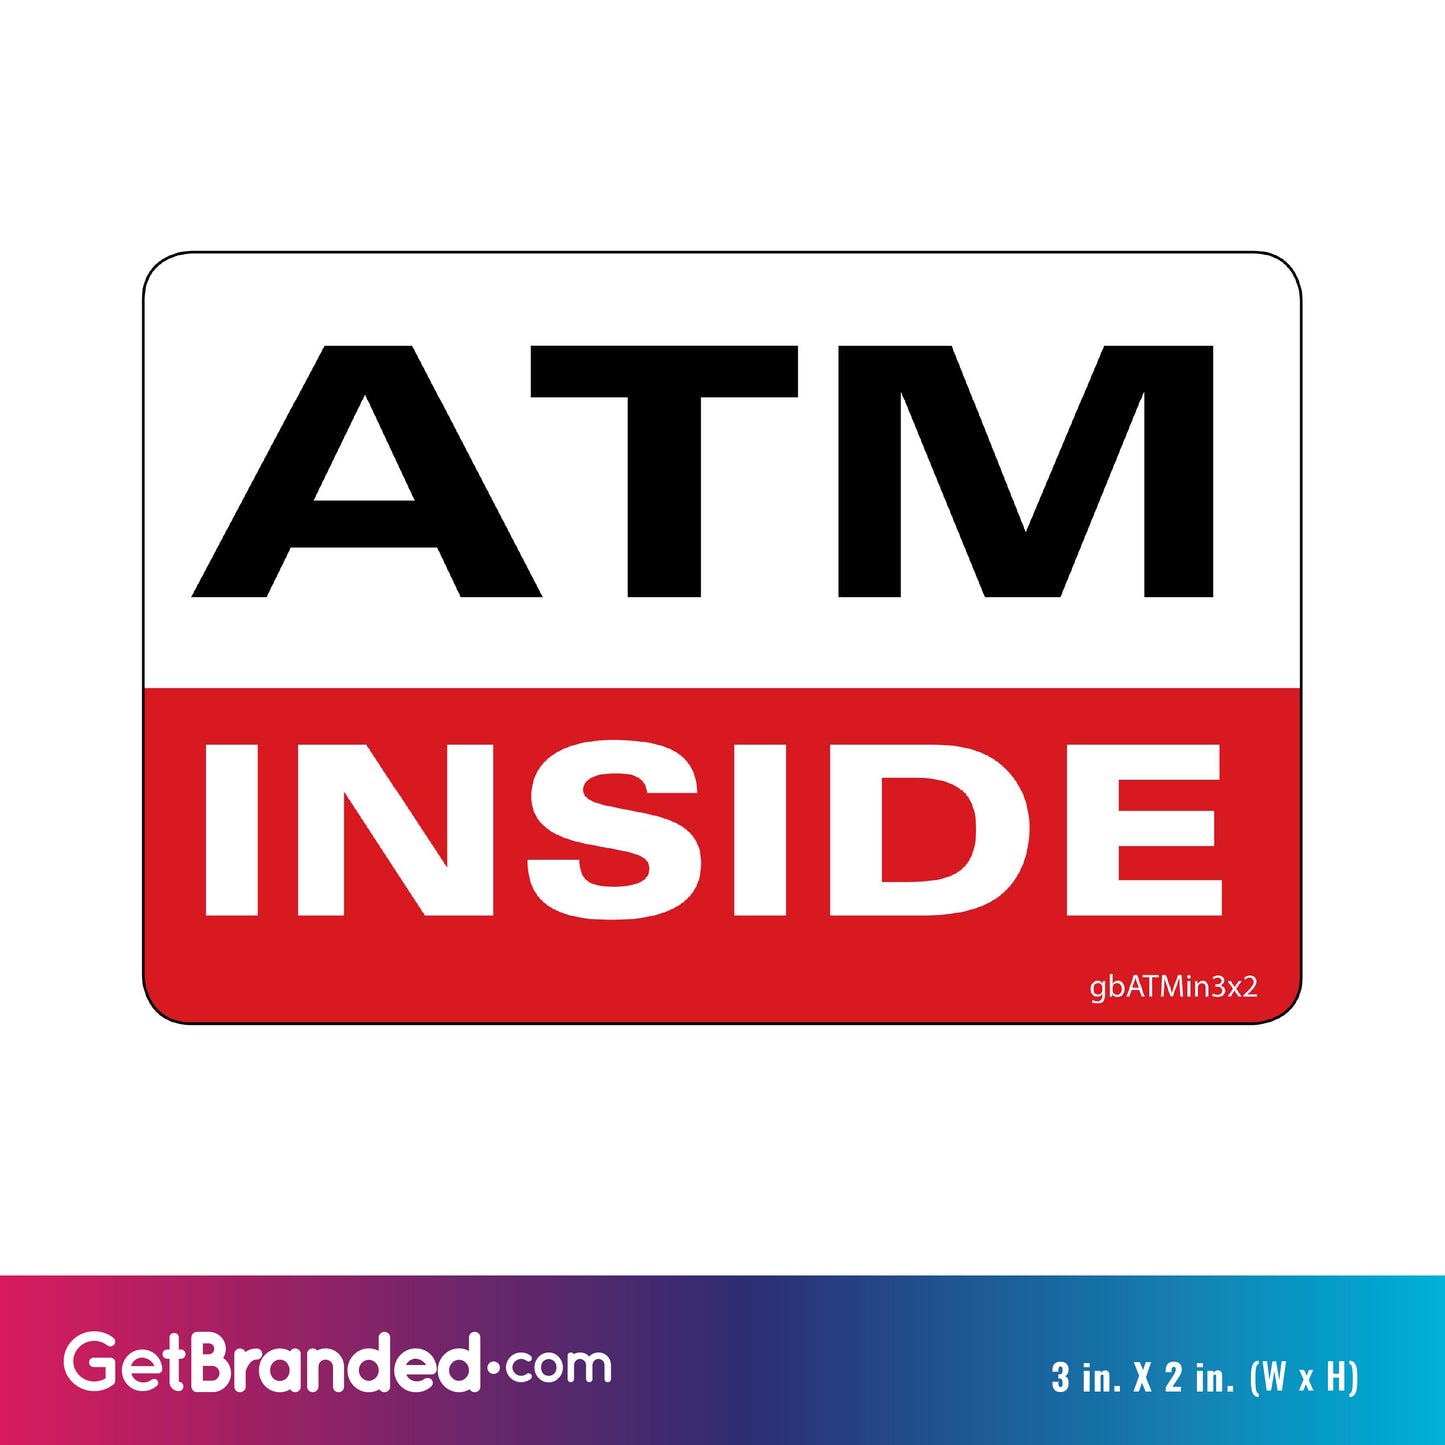 ATM Inside Decal size guide. 3 inches by 2 inches in size.